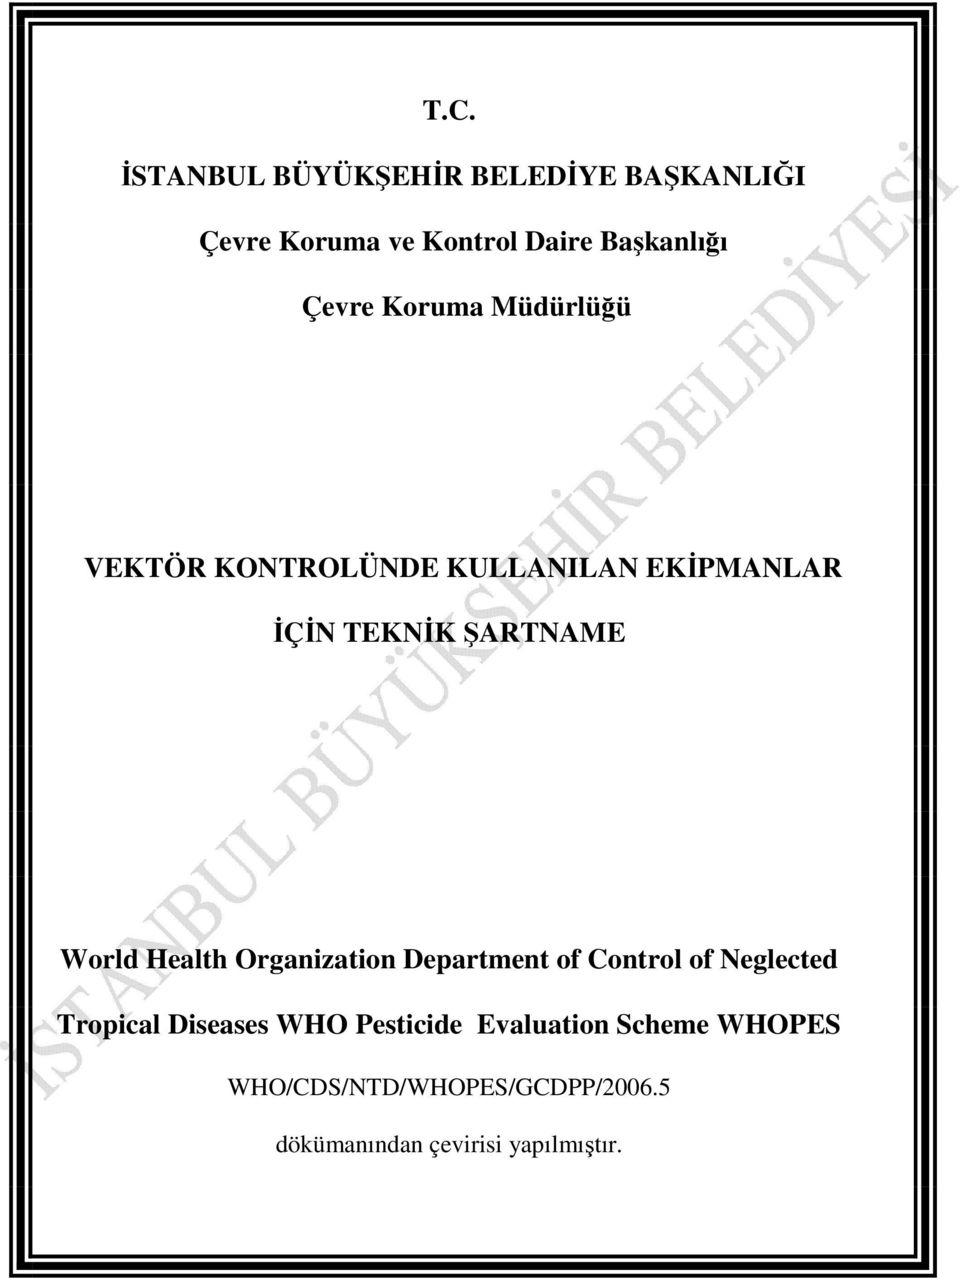 World Health Organization Department of Control of Neglected Tropical Diseases WHO